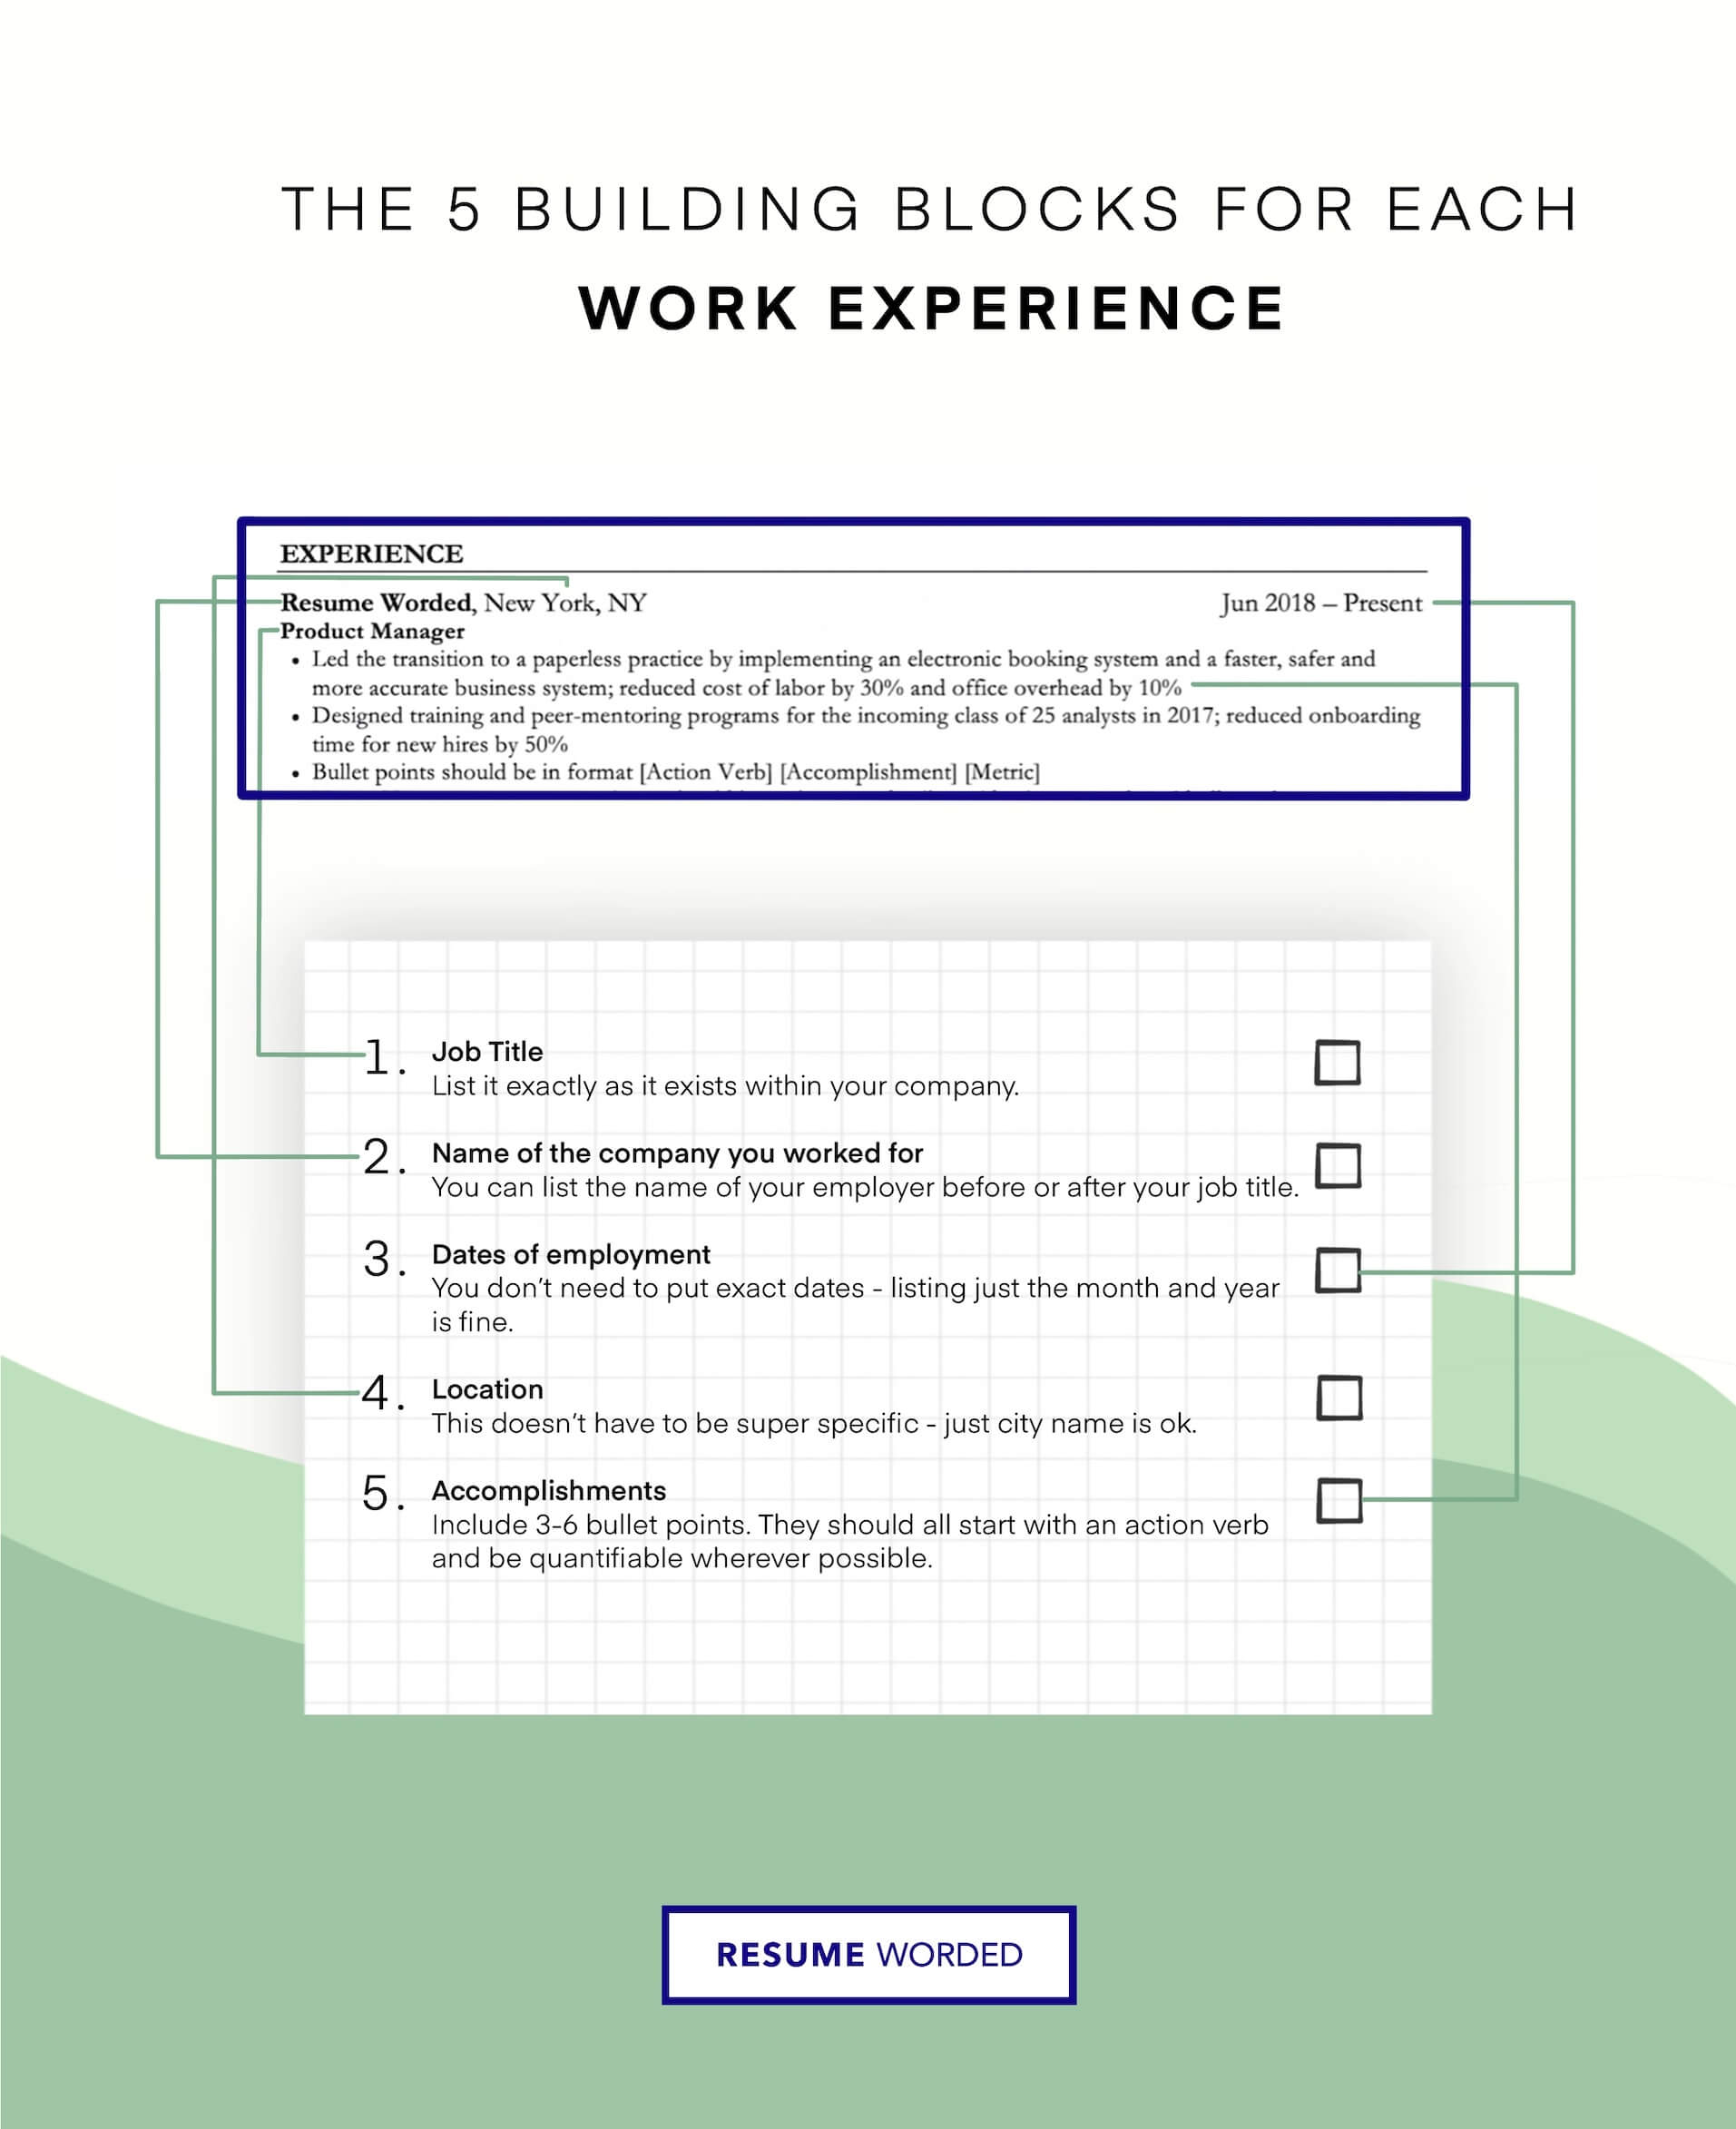 Showcase your experience solving account discrepancies or delinquency - Accounting Clerk Resume